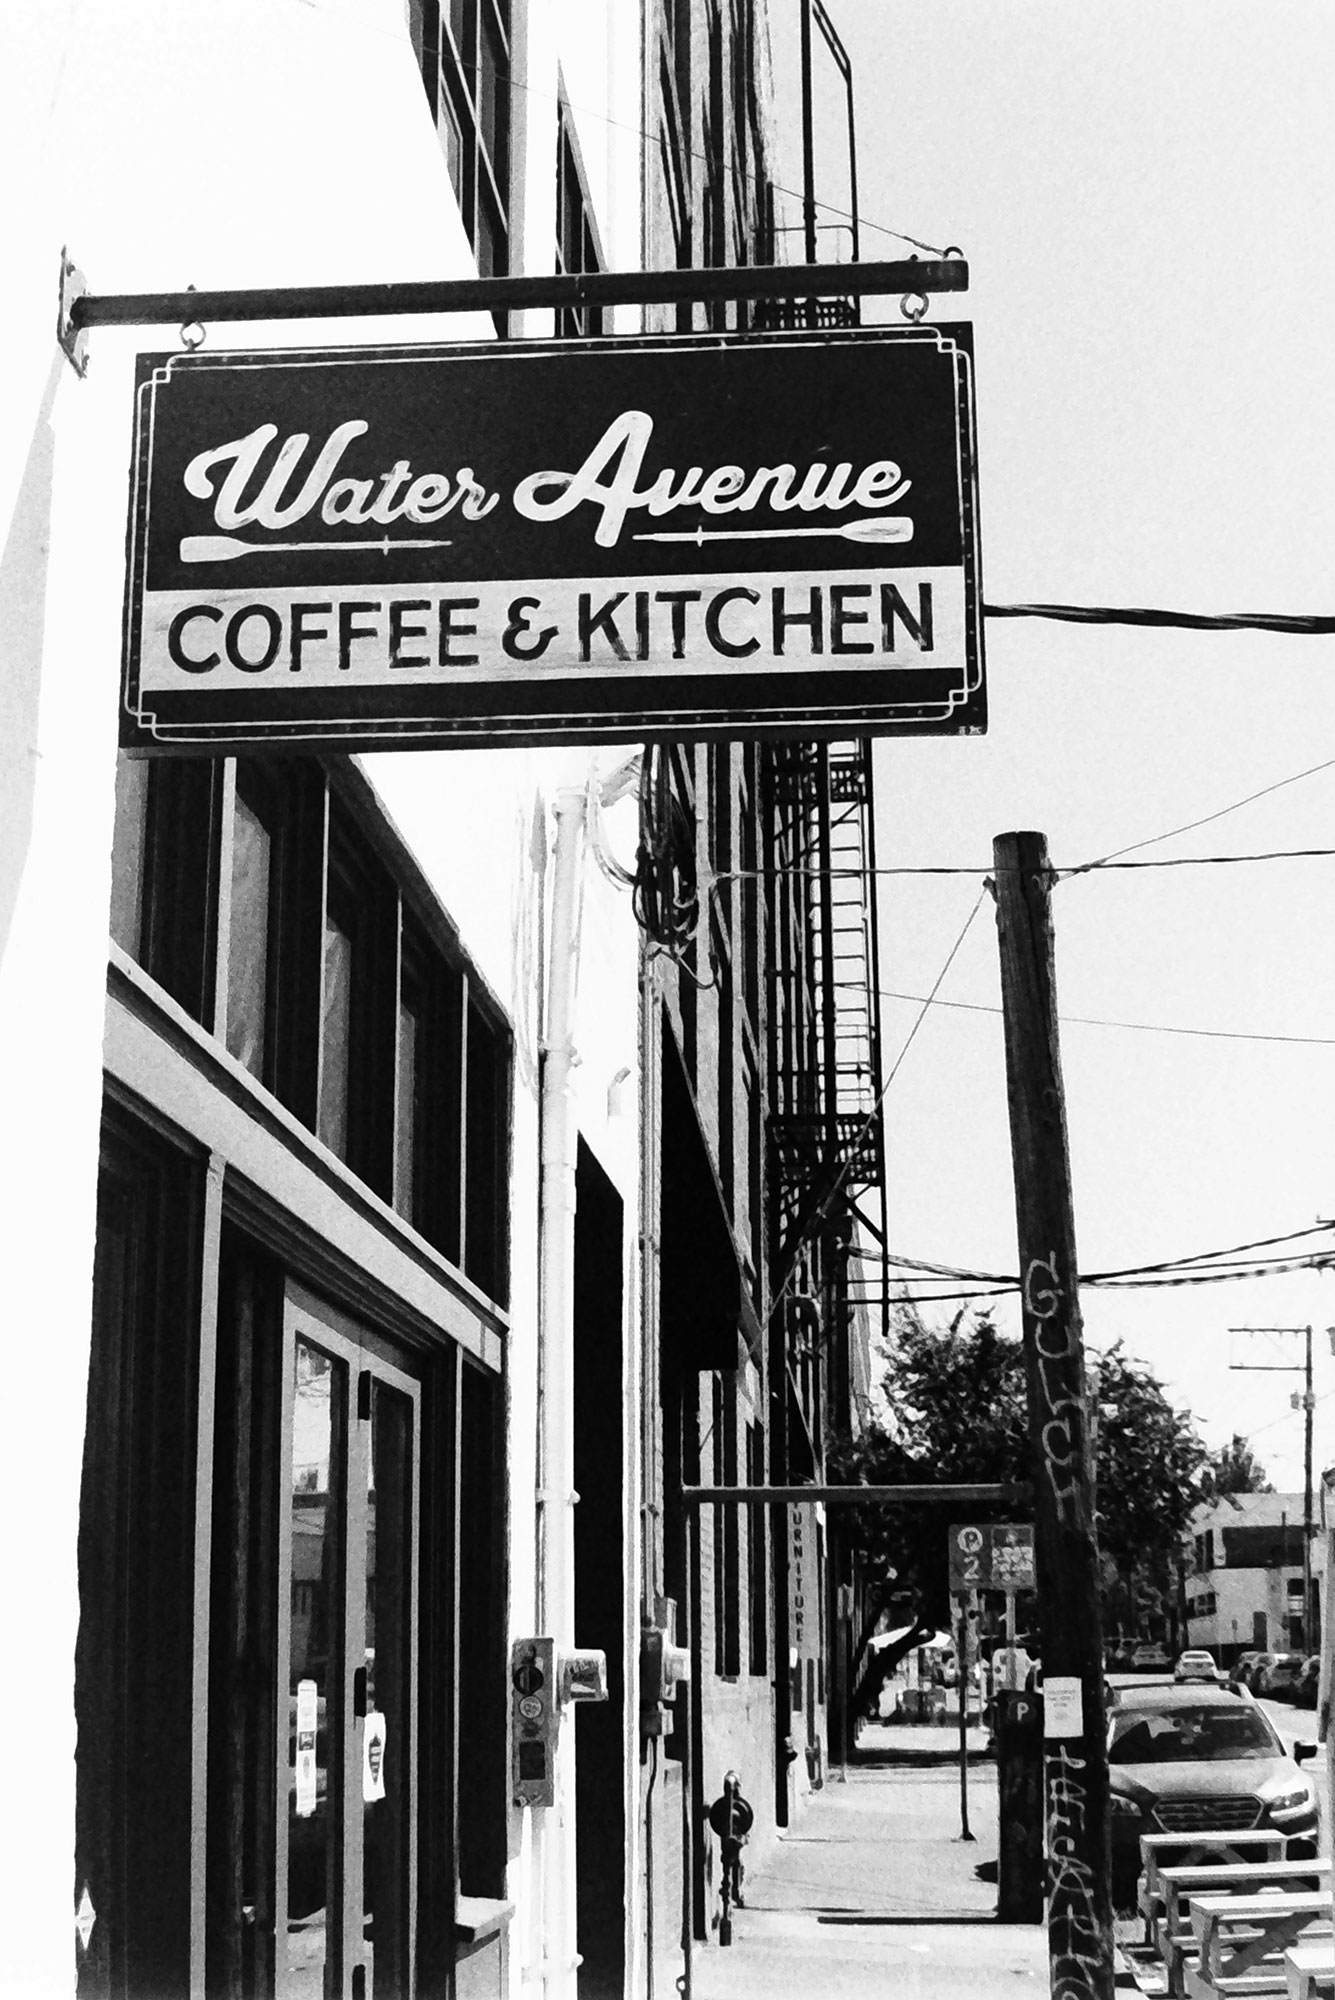 The sign for water avenue coffee and kitchen with the sidewalk below and a power pole with graffiti nearby